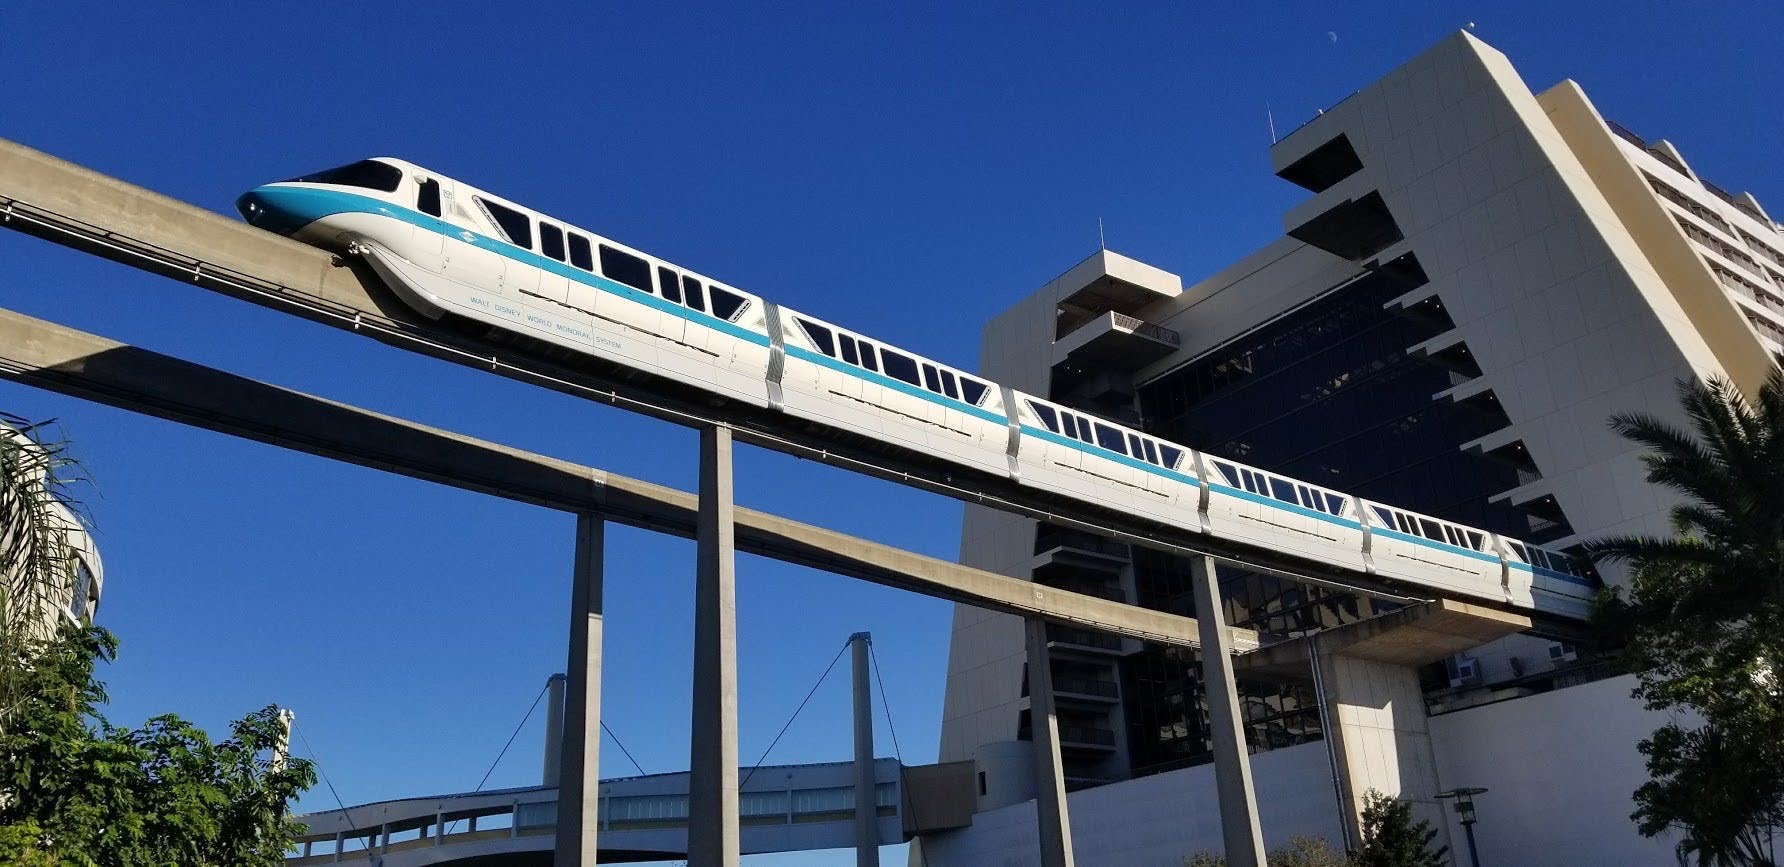 Monorails have started running again at Walt Disney World